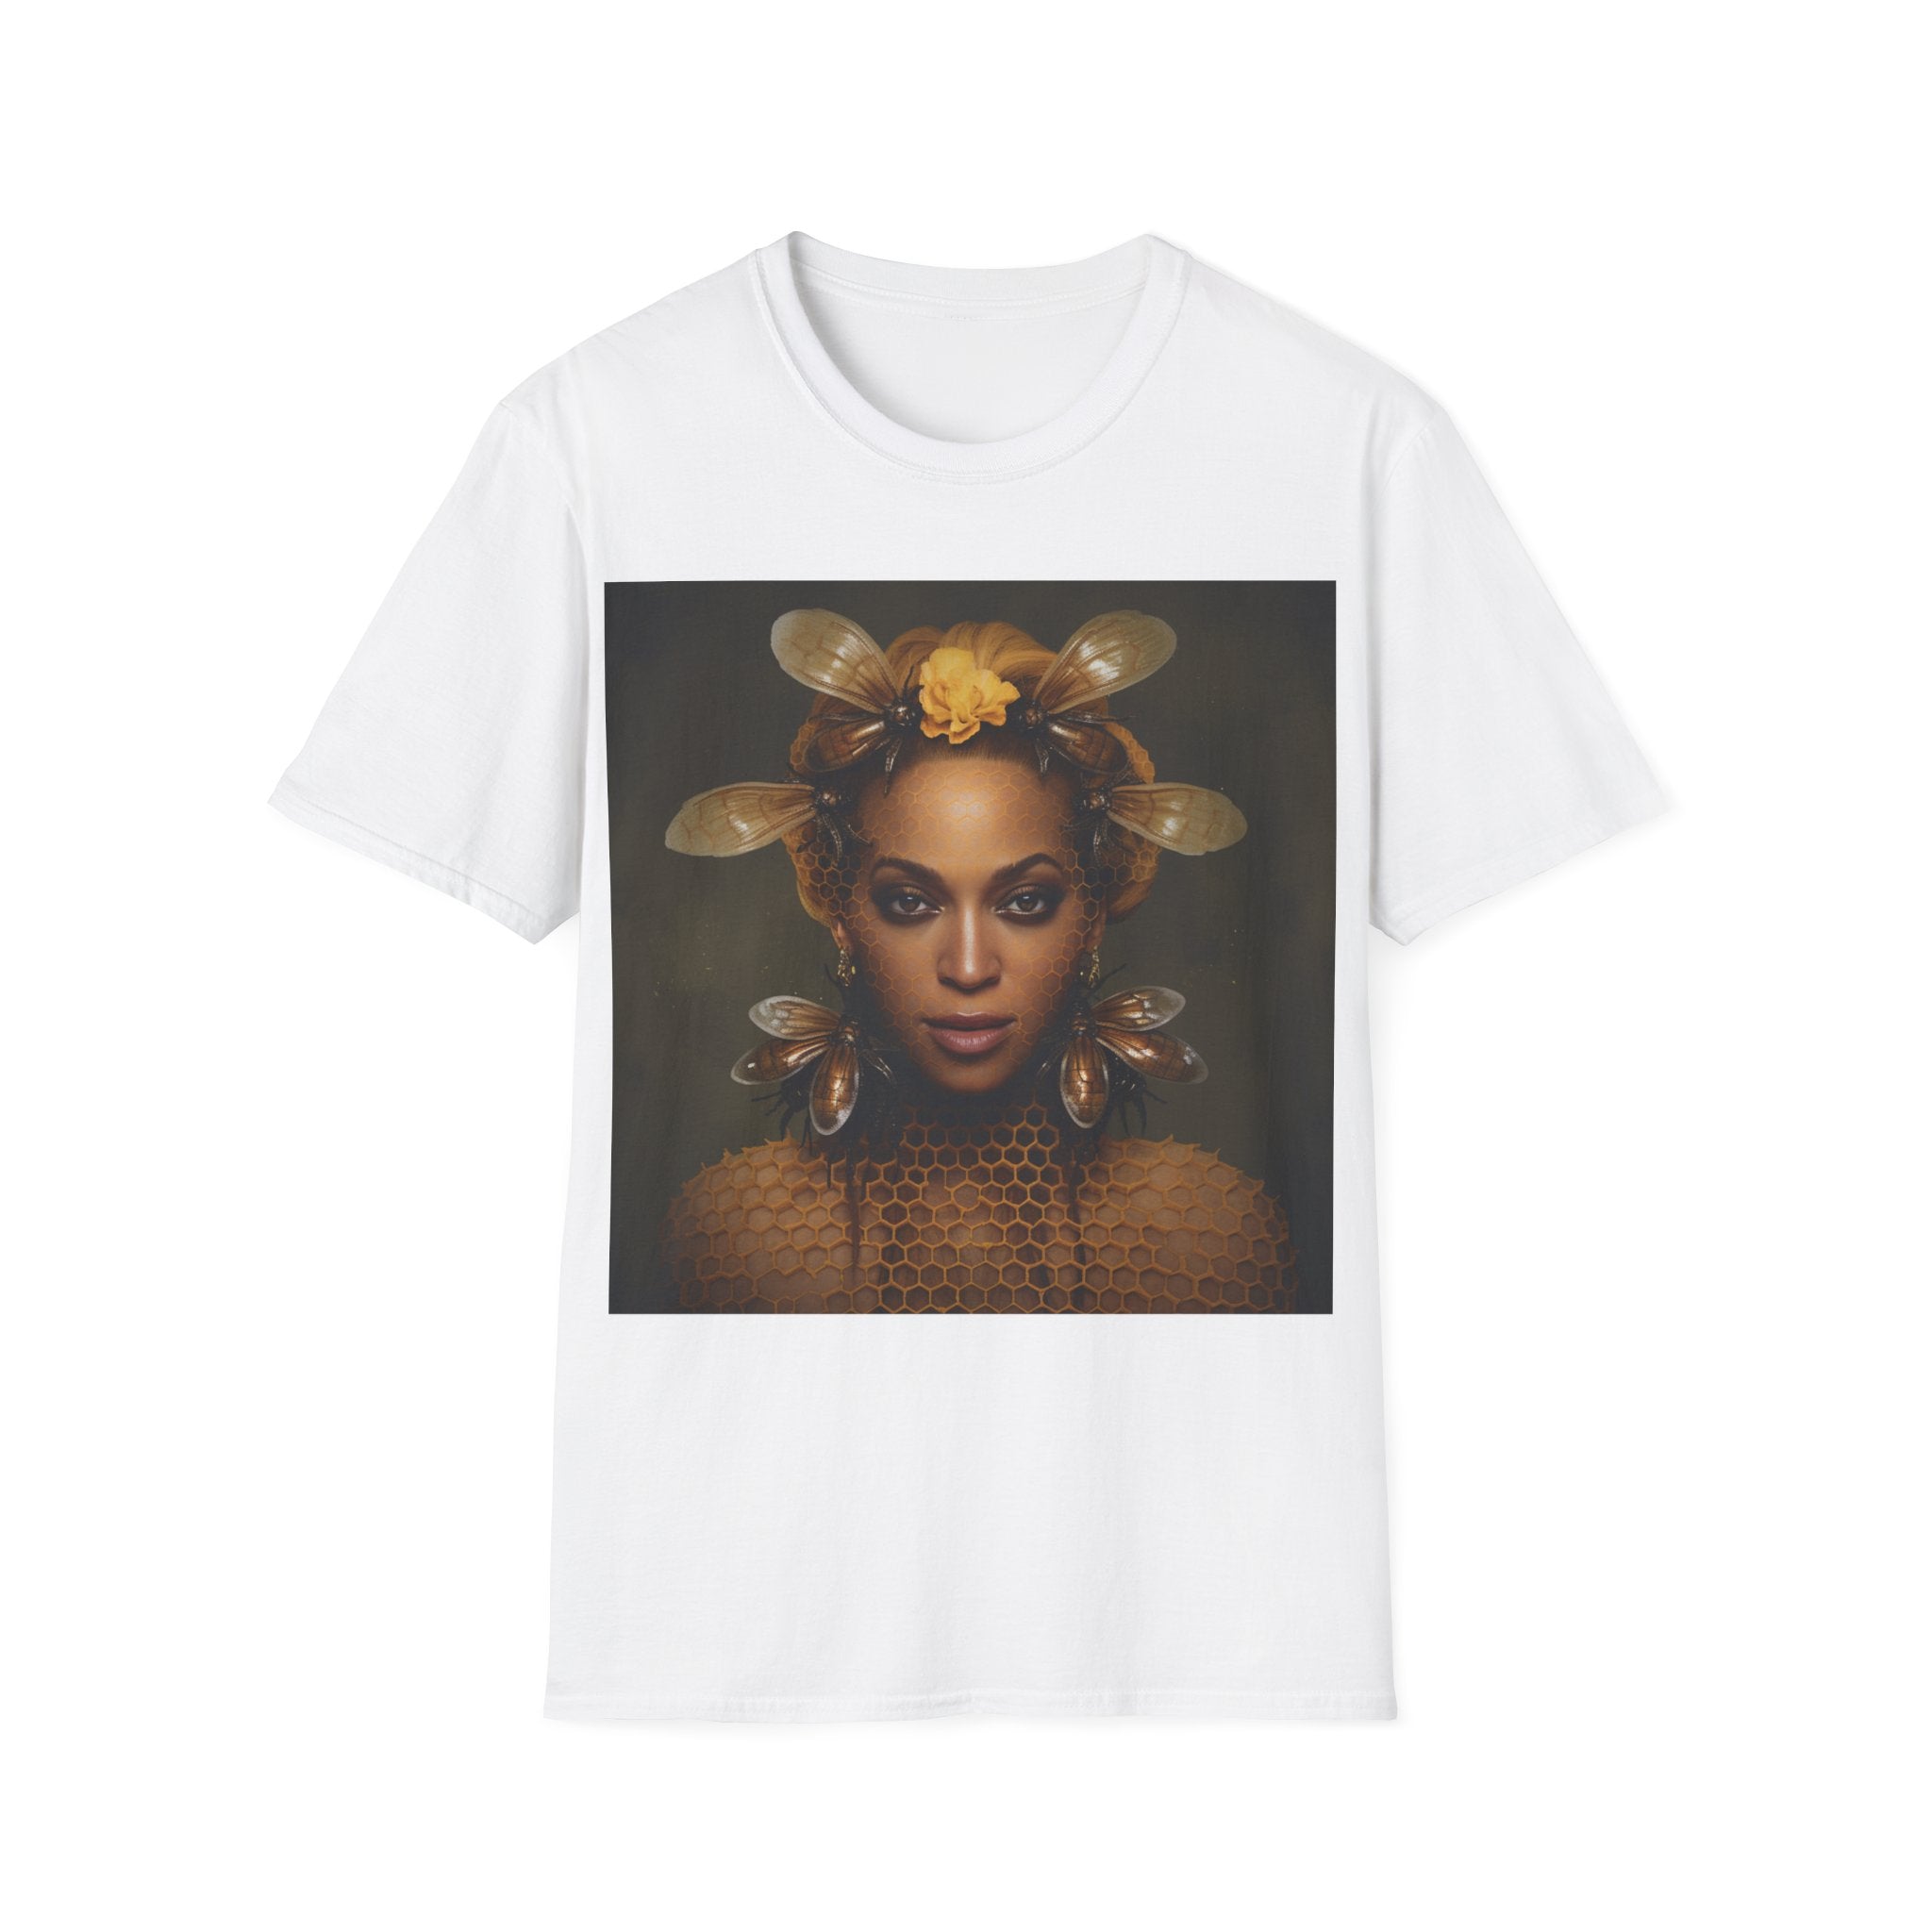 This image showcases a stylish, softstyle unisex t-shirt featuring a unique design inspired by Beyoncé. The t-shirt is displayed in a flattering cut, emphasizing its high-quality fabric and the vibrant tribute artwork that celebrates the music icon's legacy.